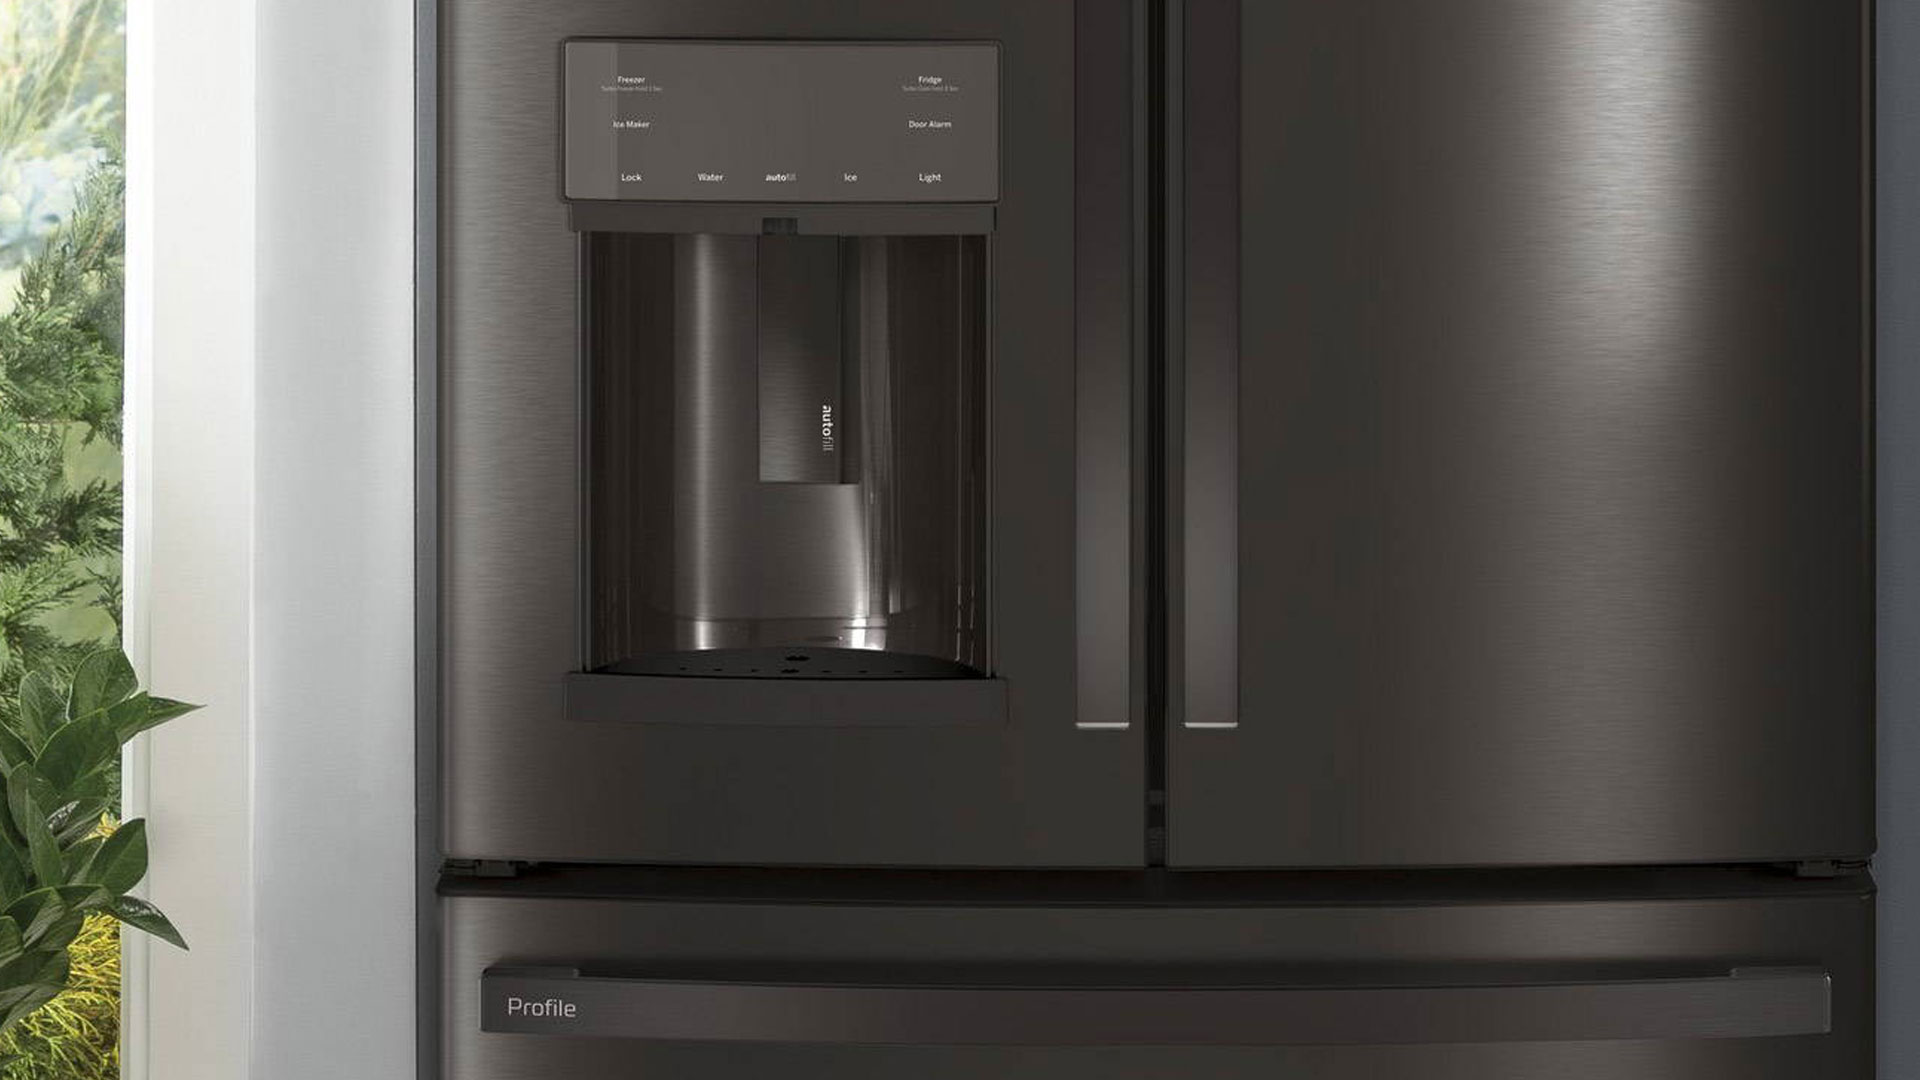 GE vs Whirlpool refrigerators: Which should you choose?